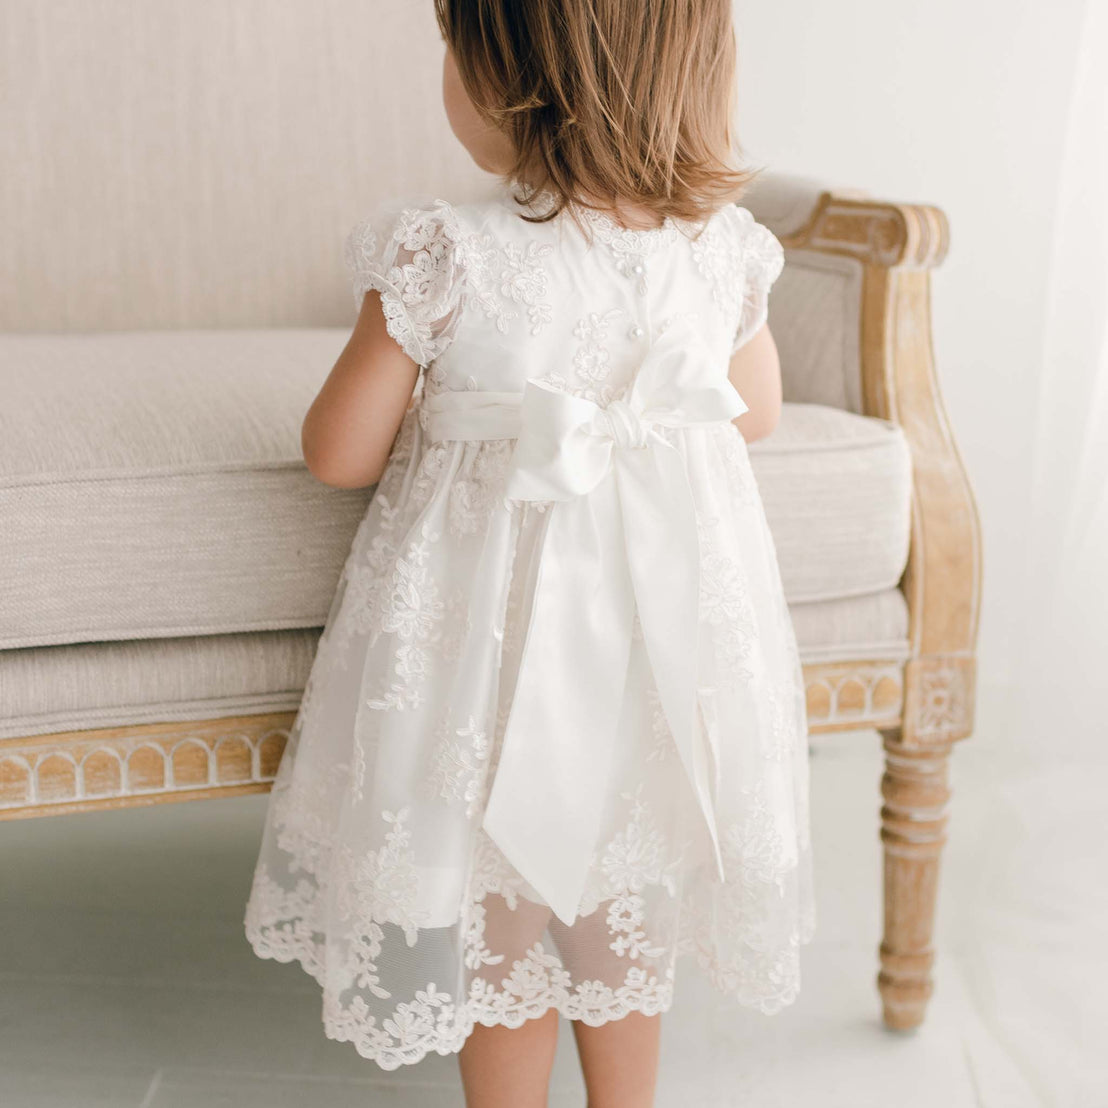 Baby girl sitting by chair wearing Penelope christening dress and bow.